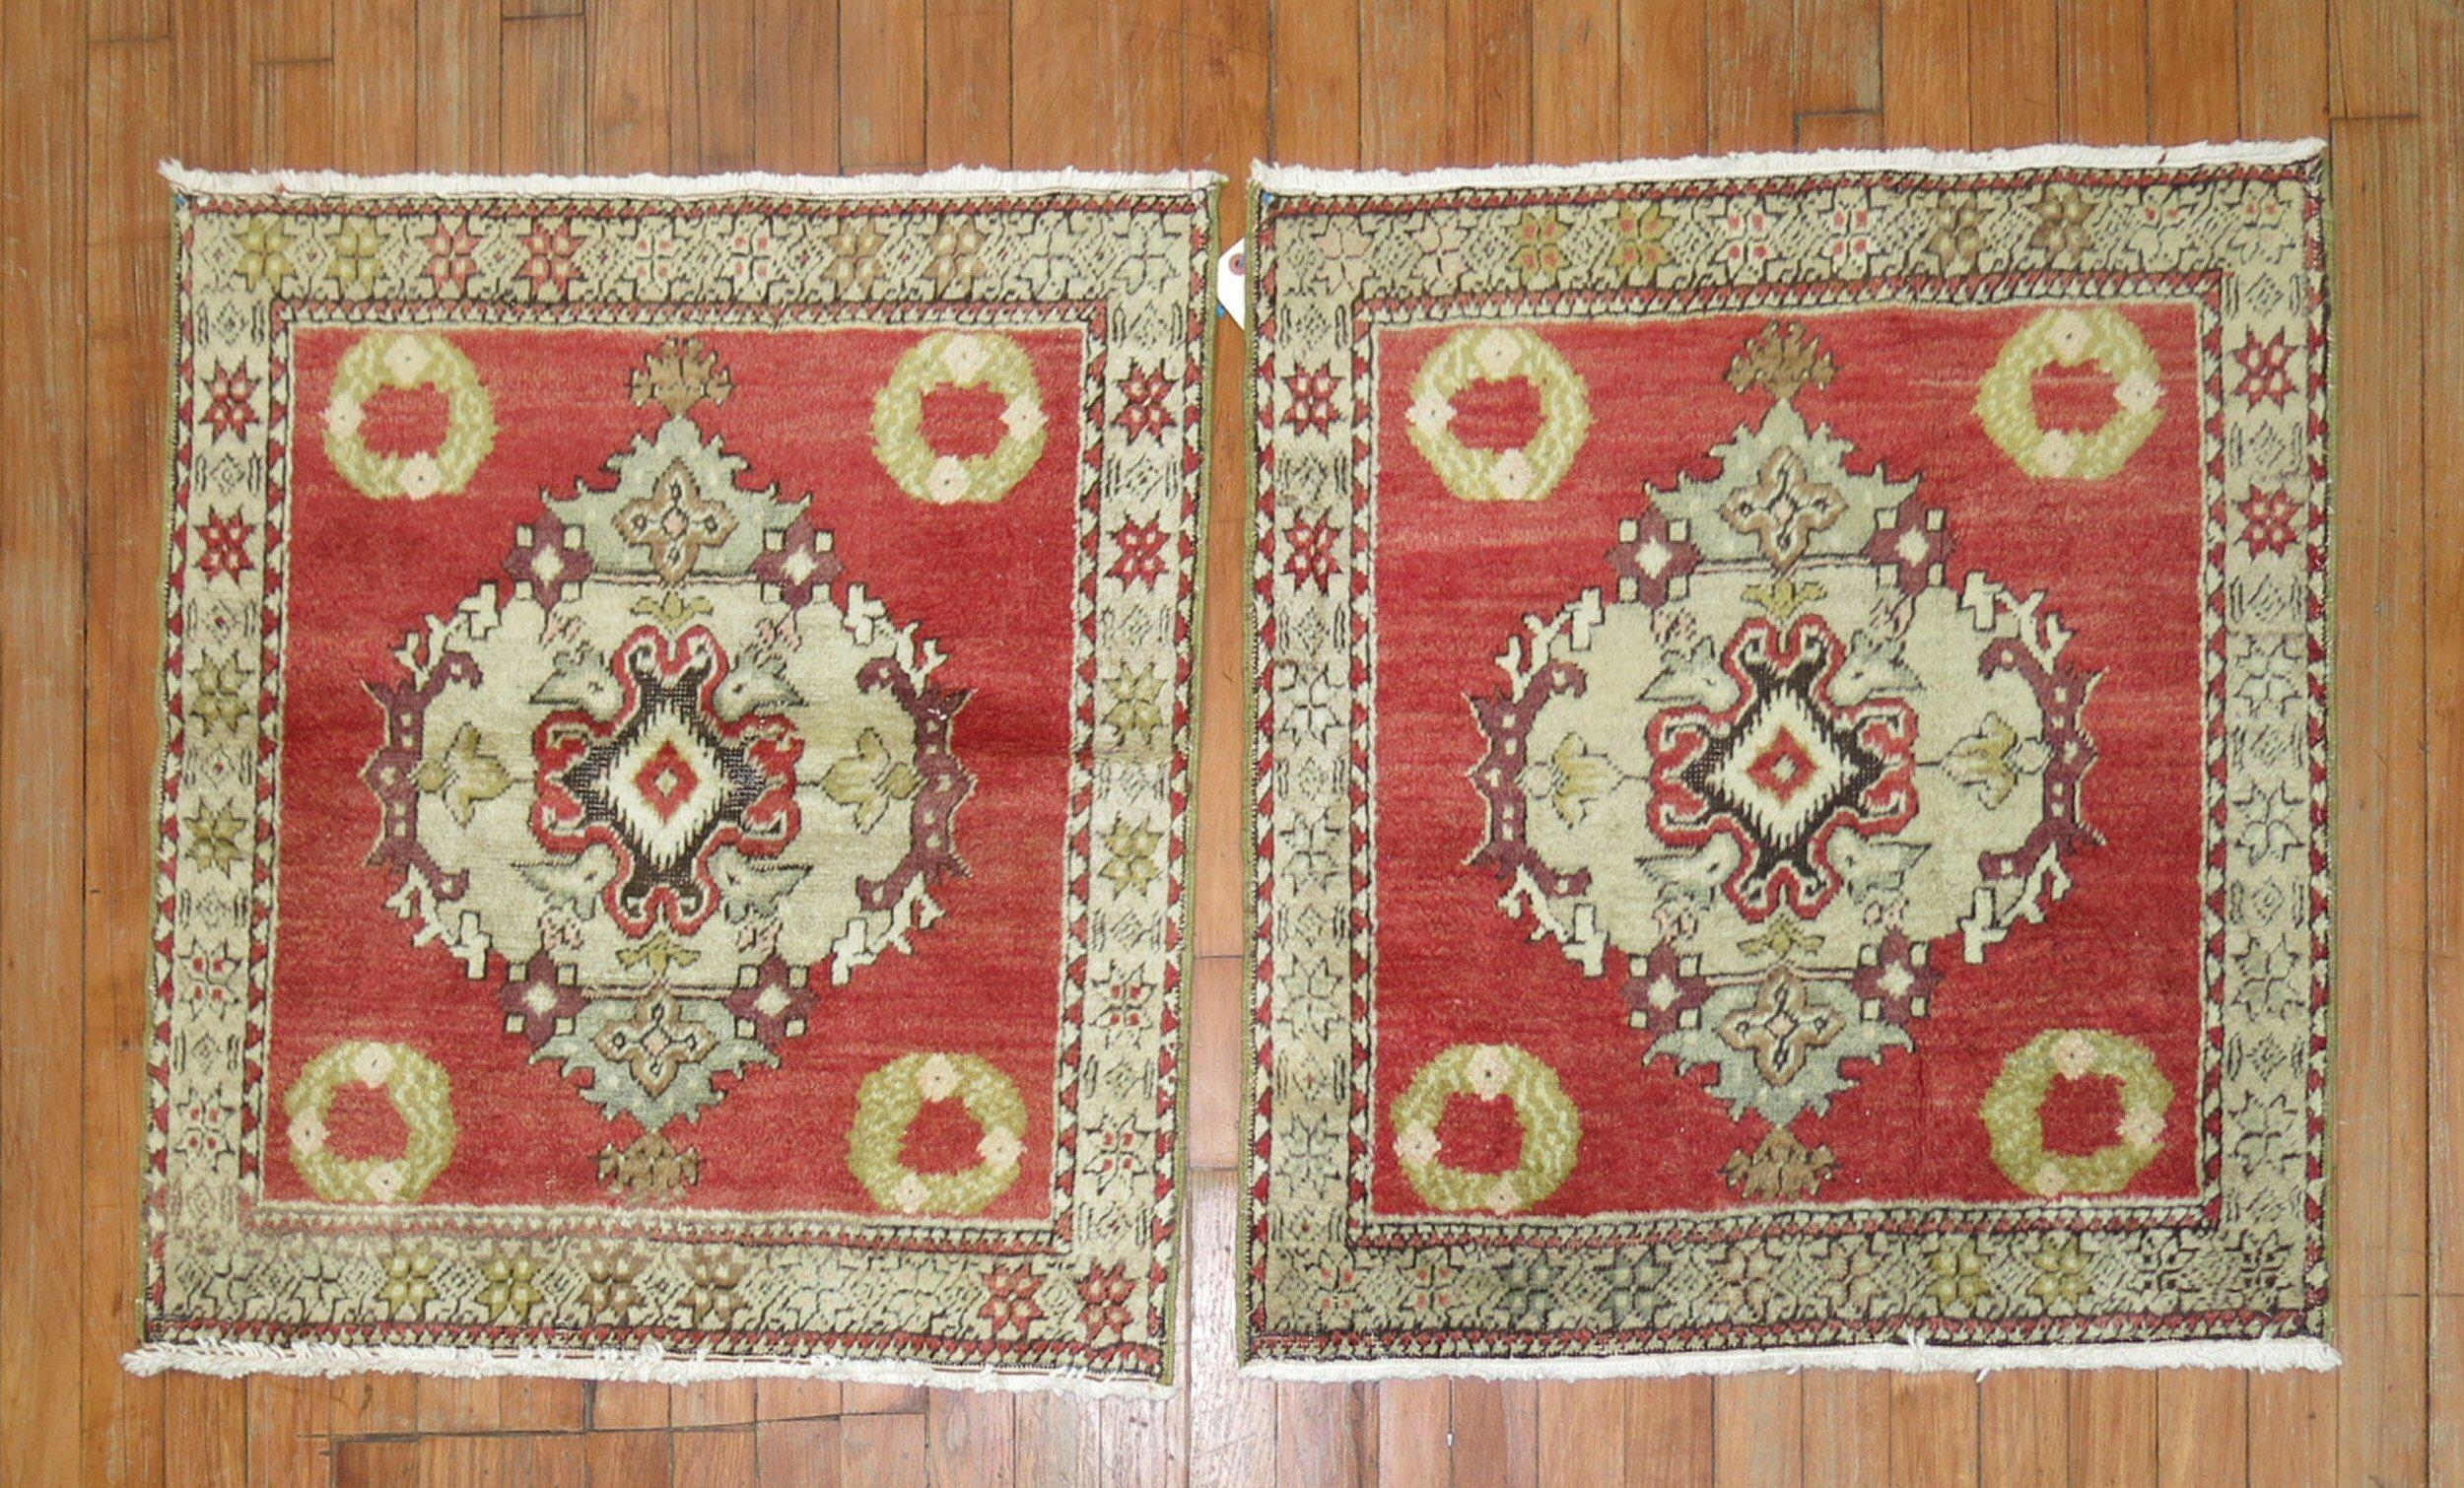 Hand-Woven Pair of Turkish Square Rugs